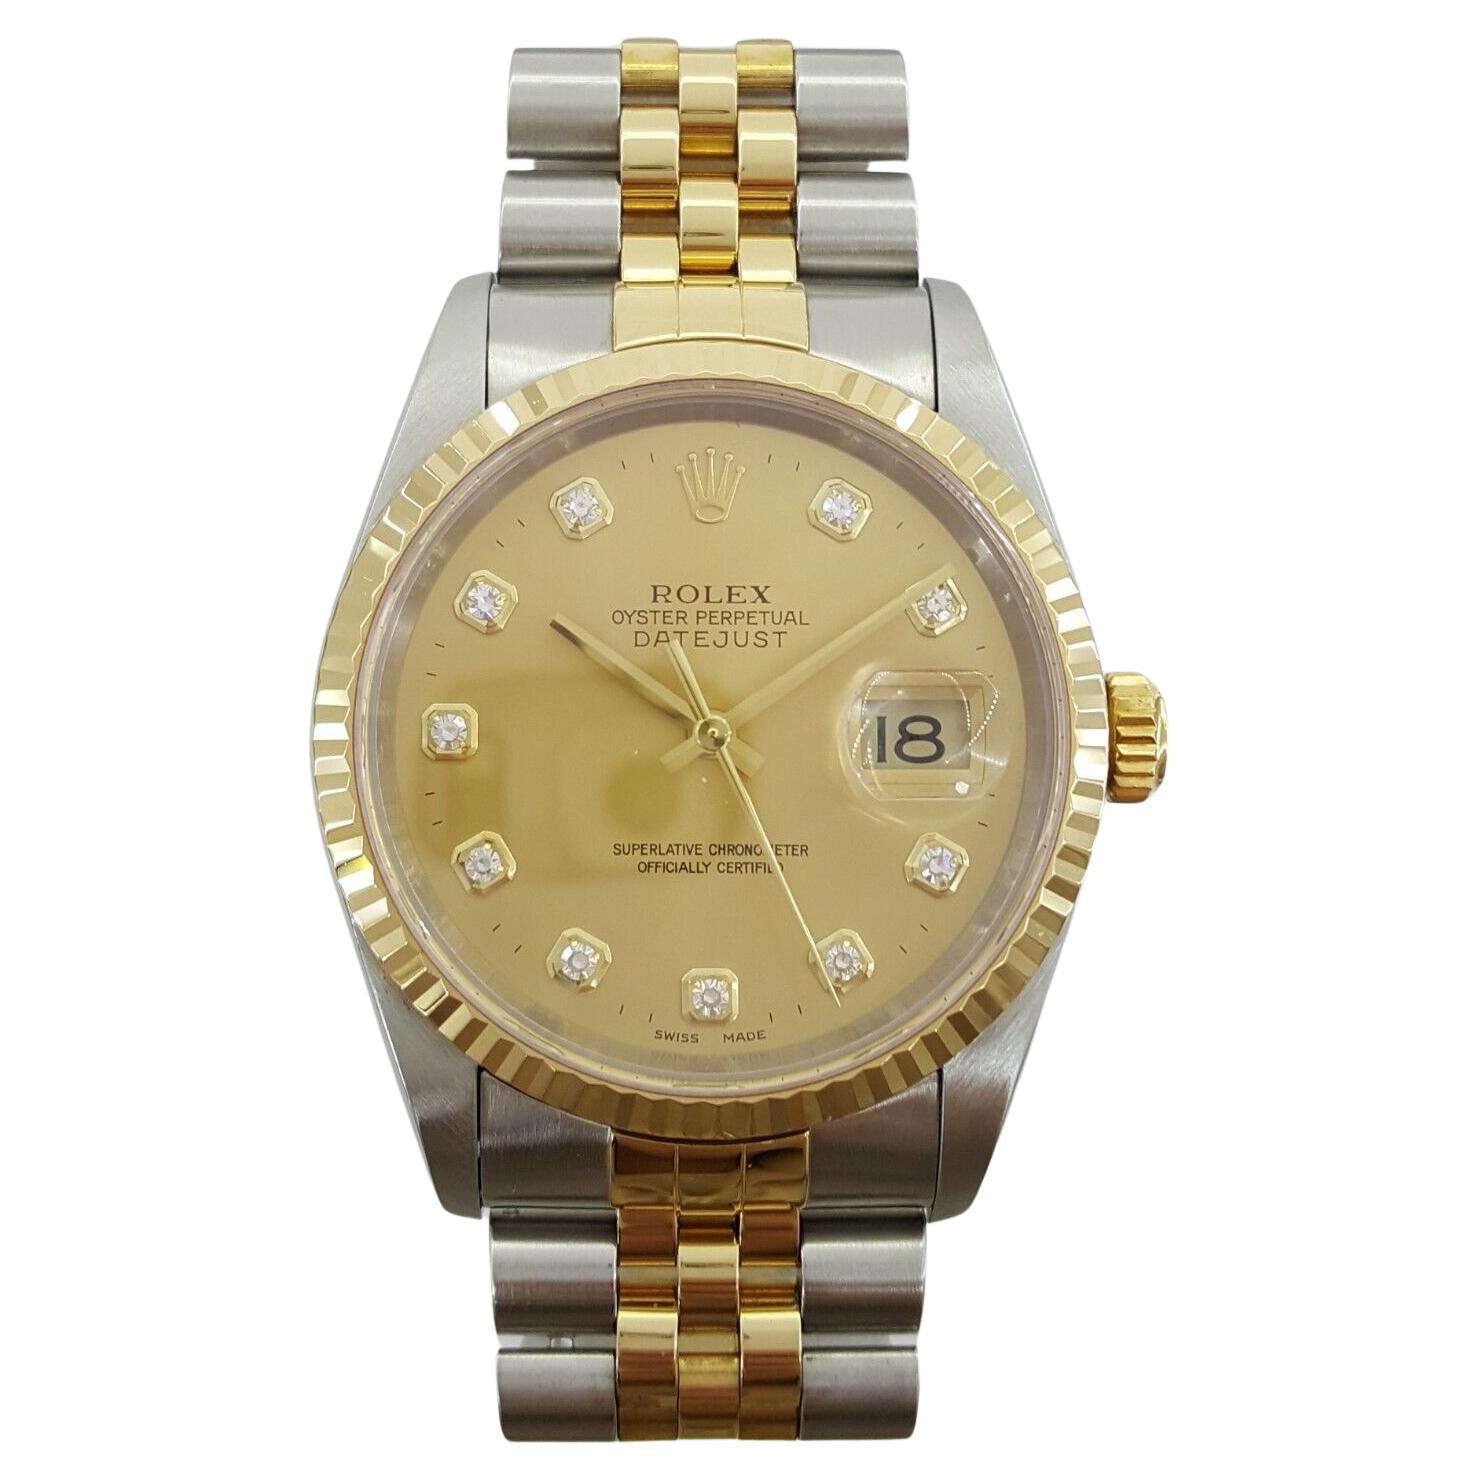 Rolex DateJust 16233 crafted from stainless steel and 18K Watch